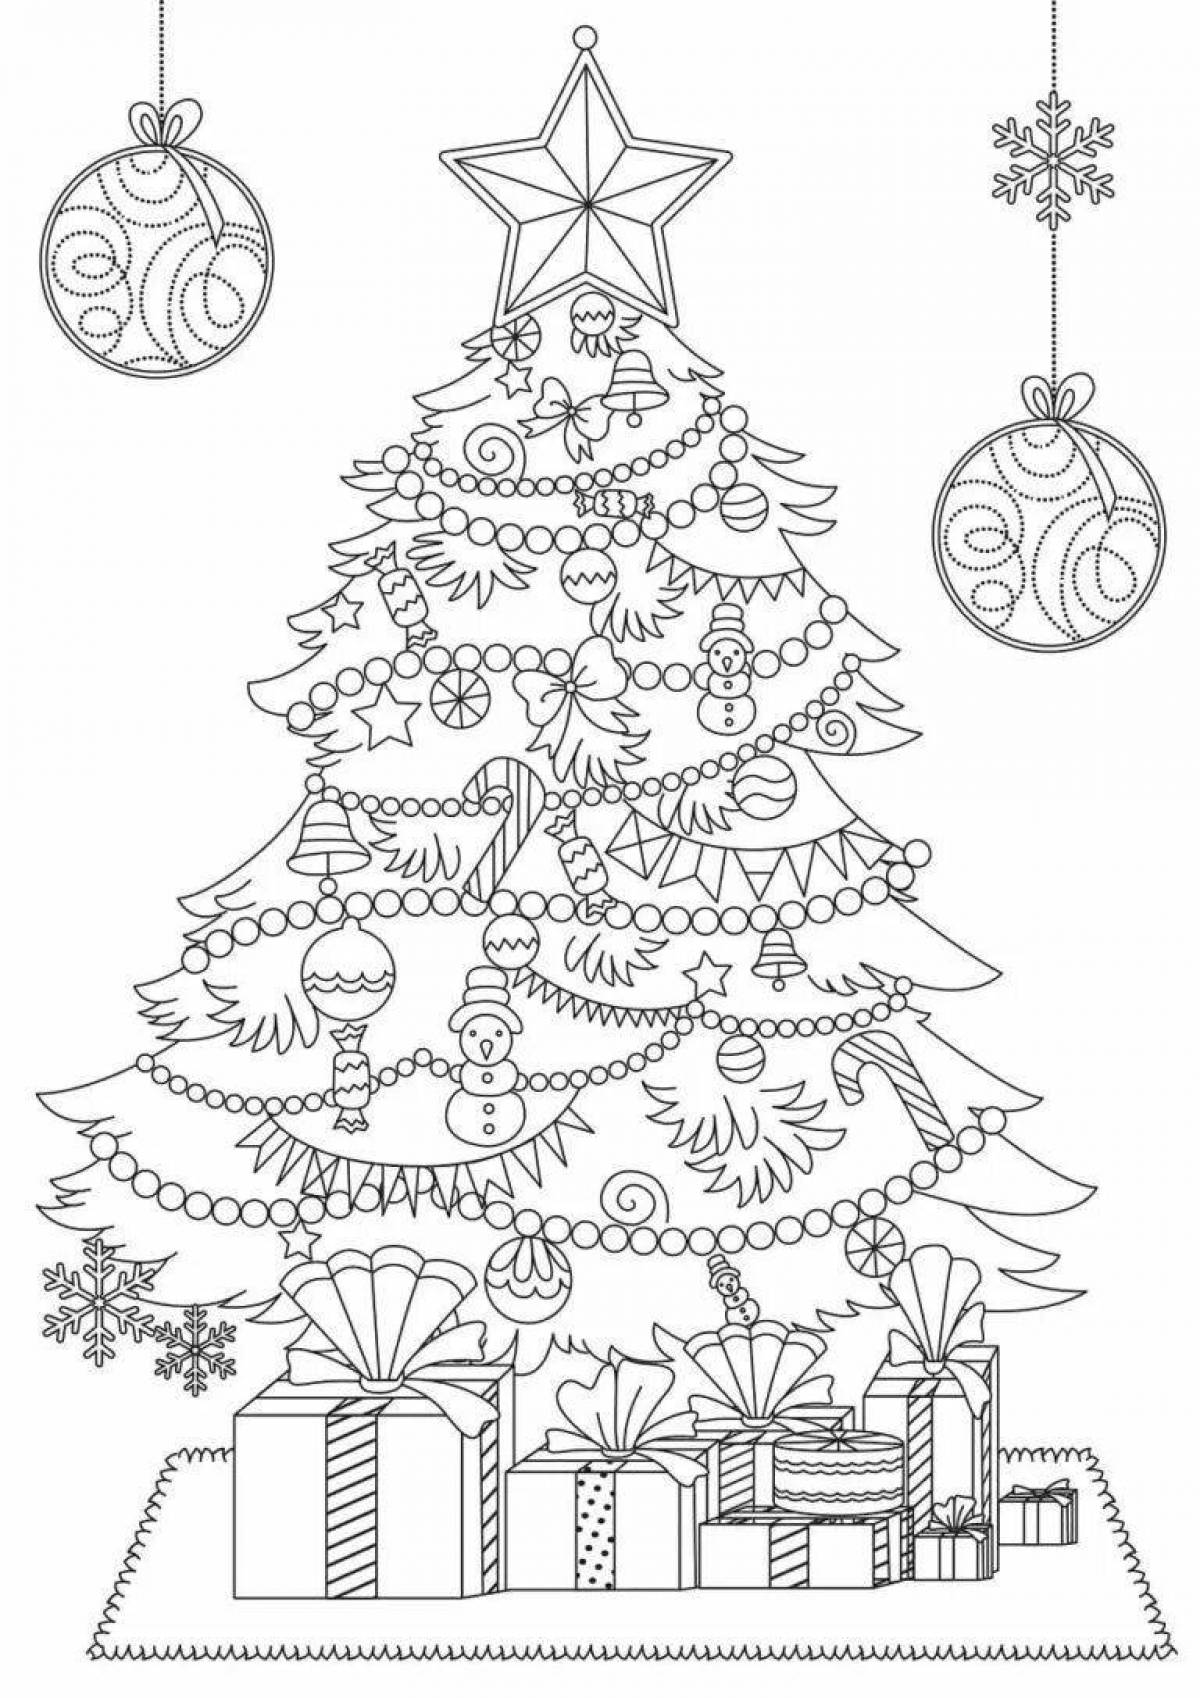 Large tree live coloring for kids